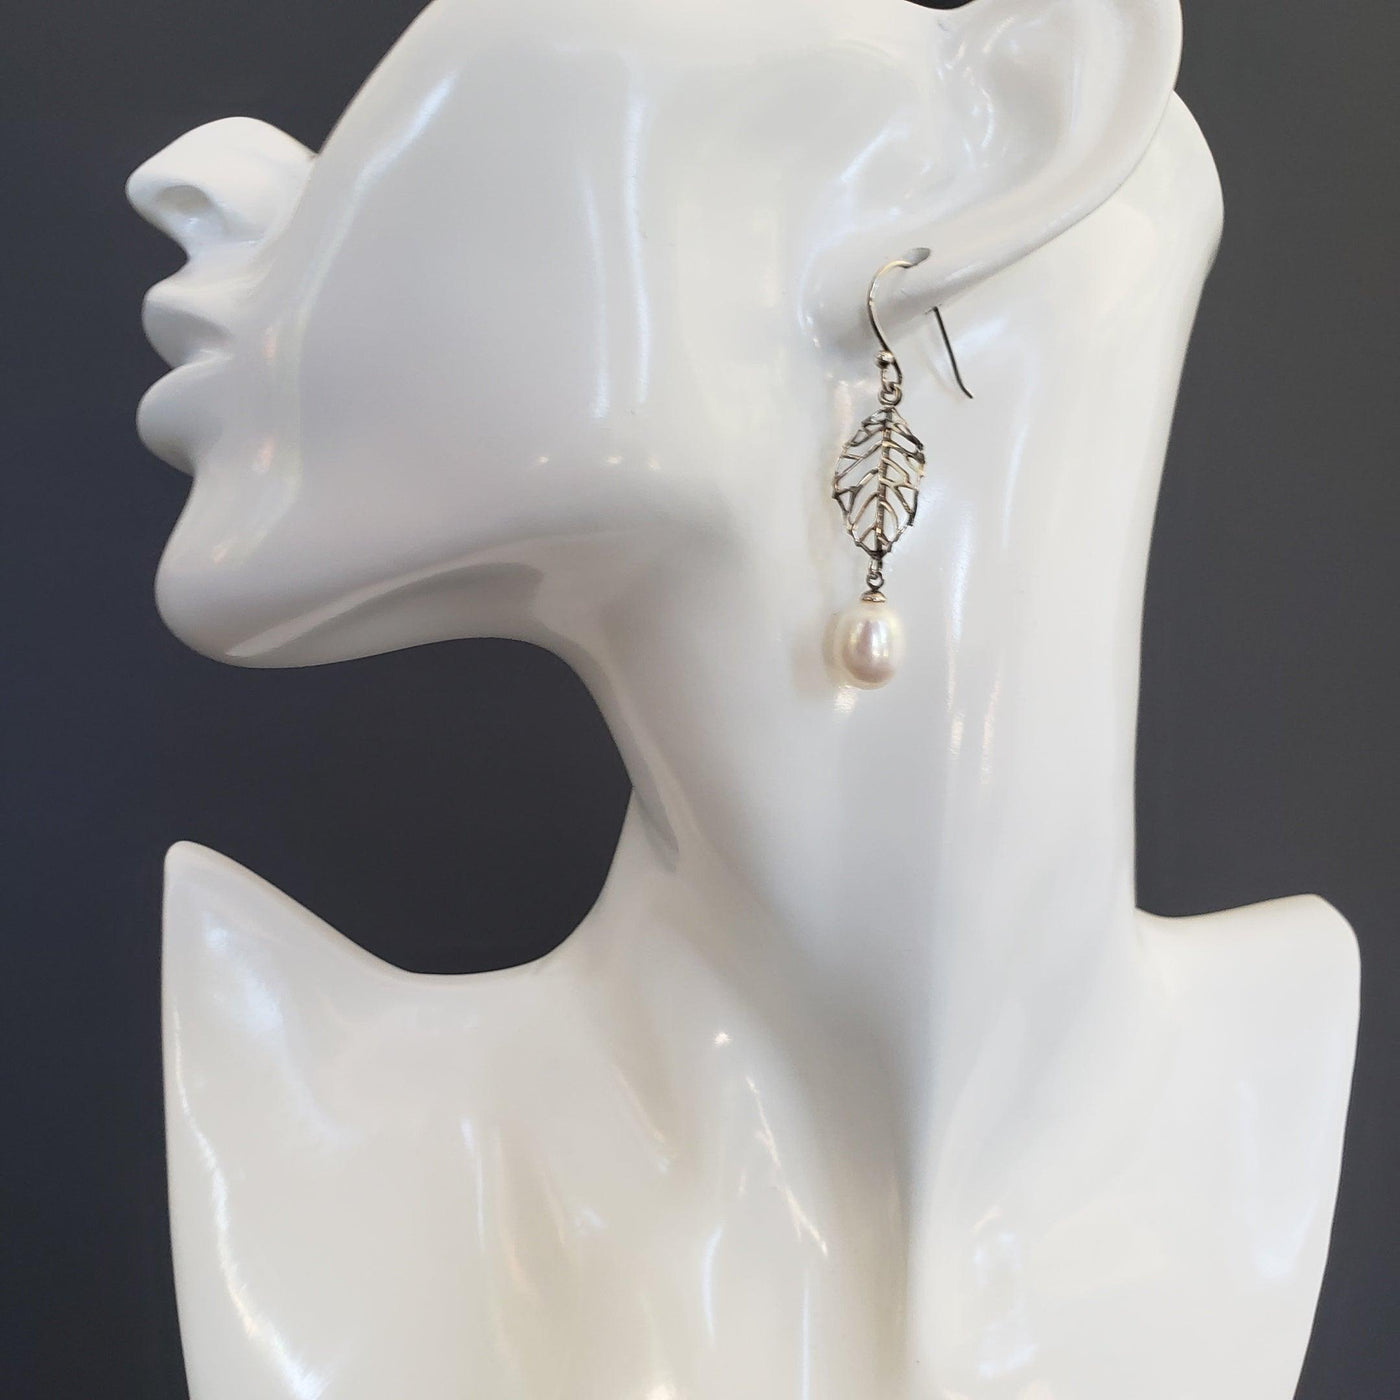 Silver leaf earring with a pearl drop